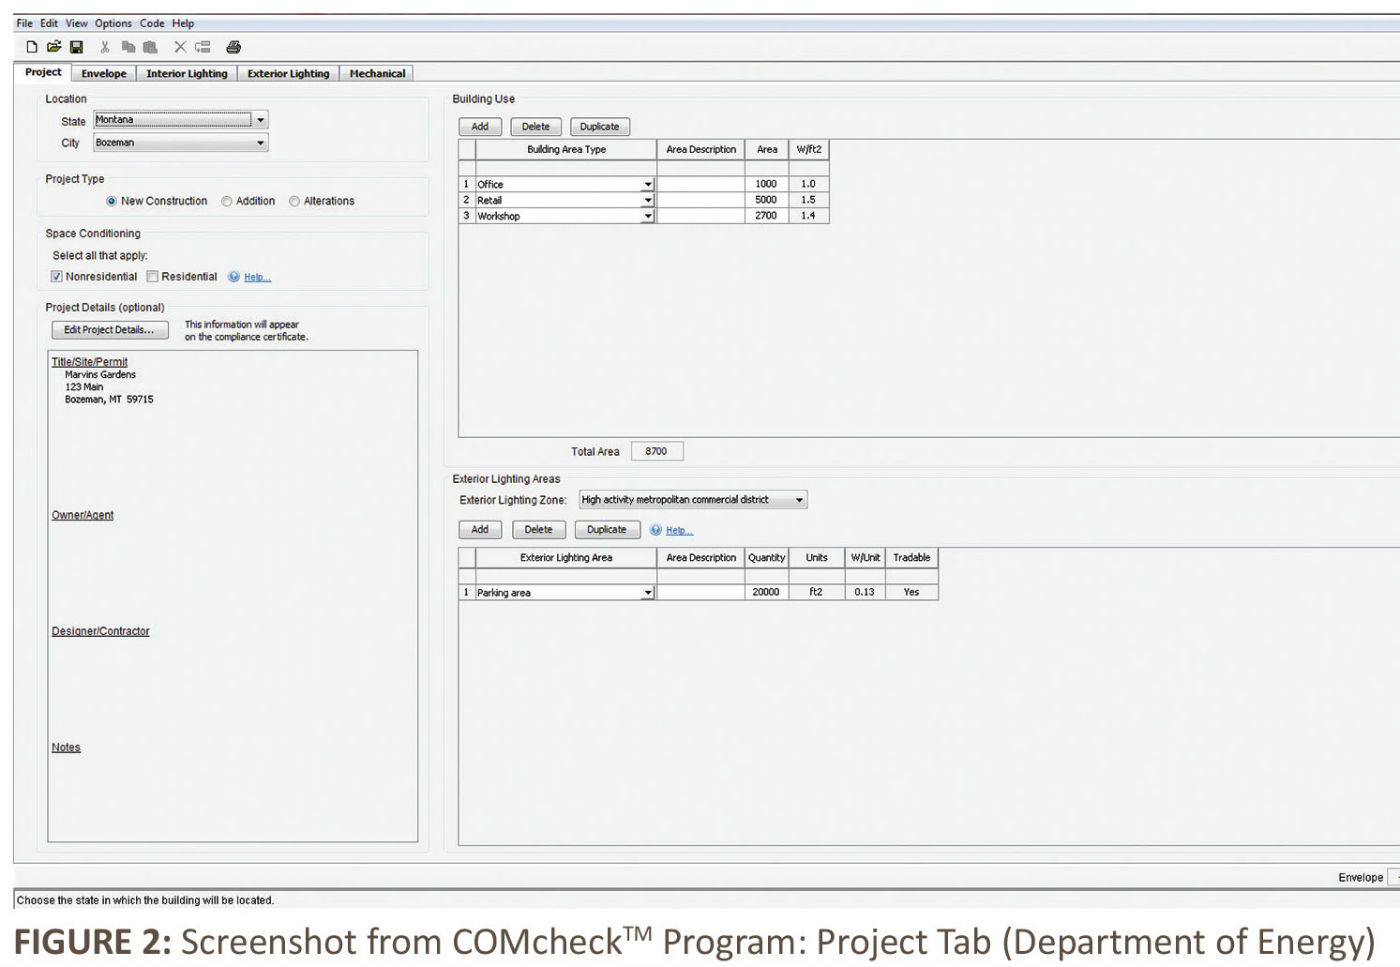 FIGURE 2: Screenshot from COMcheck<sup>™</sup> Program: Project Tab<br />
(Department of Energy)”>
    </div>
<p>Metal buildings are unique in how they are constructed and insulated, which is why both the ASHRAE standard and IECC have sections and assemblies specific to metal buildings. COMcheck<br />
offers the same option, with a section specifically for metal buildings. In terms of meeting building standards, there are 2 main approaches. The first is the prescriptive approach, which<br />
architects and specifiers often use to meet the envelope requirements. The prescriptive approach meets all portions of the codes by U-factor and allows no trade-offs. Alternatively,<br />
individuals can use the trade-off approach, which is the method supported by COMcheck software. Many construction professionals choose this method because it allows them more flexibility<br />
in their building process. Utilizing a trade-off approach, a construction professional could increase the performance of the roof or wall U-factor, and then follow a less stringent<br />
standard for other, less crucial areas of the envelope. For example, many codes require both a single layer of fiberglass and a continuous (board) insulation to be installed in a<br />
structure’s walls. However, this is not always possible or cost-effective. Using the trade-off method, builders can increase the roof insulation to surpass the required U-factor, allowing<br />
them to put only a single layer in the walls and be compliant.</p>
<p>COMcheck was welcomed by many architects and metal building contractors as a path to compliance and a way to simplify a sometimes confusing energy code. Additionally, the software<br />
offers an opportunity to substantiate and ensure the energy efficiency of metal buildings. COMcheck has an envelope-only option for metal building contractors, and many contractors can<br />
obtain a building permit based on passing the envelope-only codes. COMcheck also has lighting and HVAC options, if additional code compliance certificates are needed for these disciplines.
</p>
<p>To access the envelope-only option, users can click on the “Envelope” tab on COMcheck’s opening screen (see Figure 1 above). This tab contains many drop-down lists that address various<br />
assemblies of the envelope. It may be tempting to use the default values in many areas, as this information may not be available. Unfortunately, this can often cause the envelope to fail<br />
to meet standards because the default values are very low on fenestrations, doors, overhead, and pass doors. By using products that have performance levels above the default values,<br />
construction professionals can begin the trade-off process that will allow them to obtain compliance. (See the sidebar “COMcheck Walkthrough,” on page 10, for more details on running a<br />
COMcheck report.)</p>
<div style=